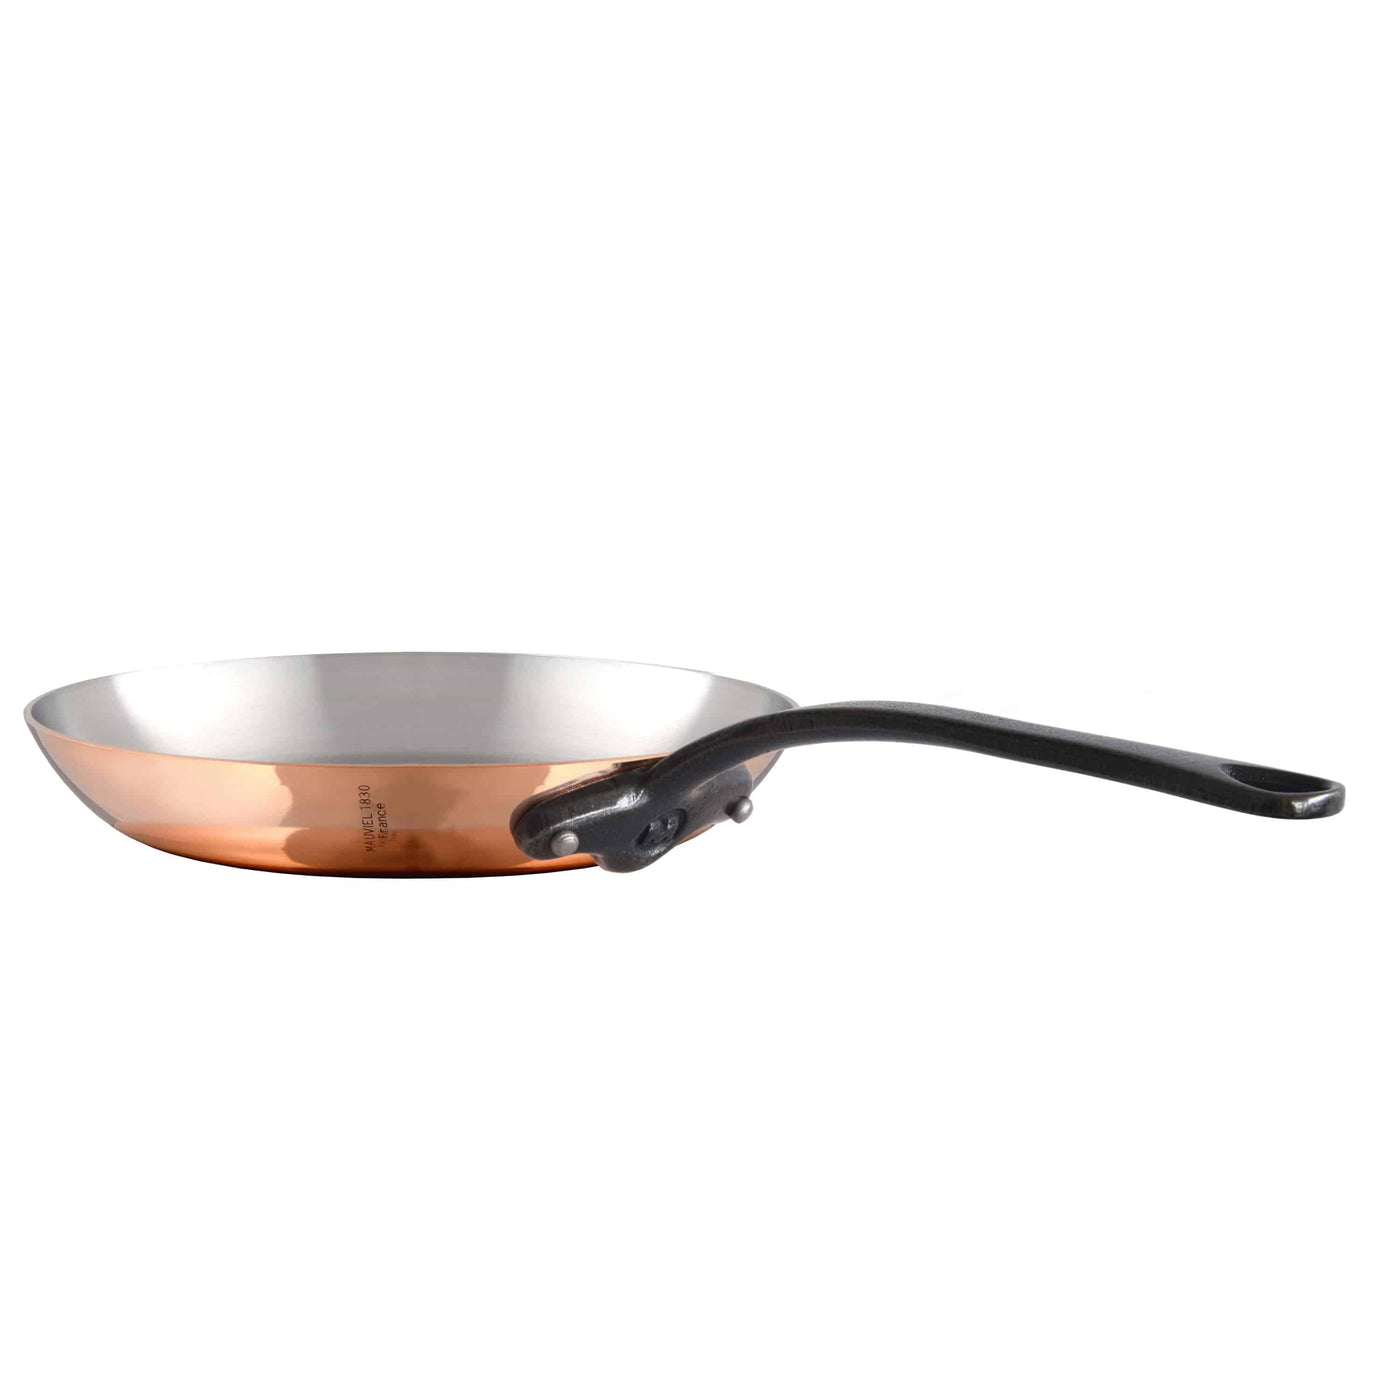 Mauviel M'heritage M200ci 2.0 mm Copper Frying Pan, 8-in. - Kitchen Universe